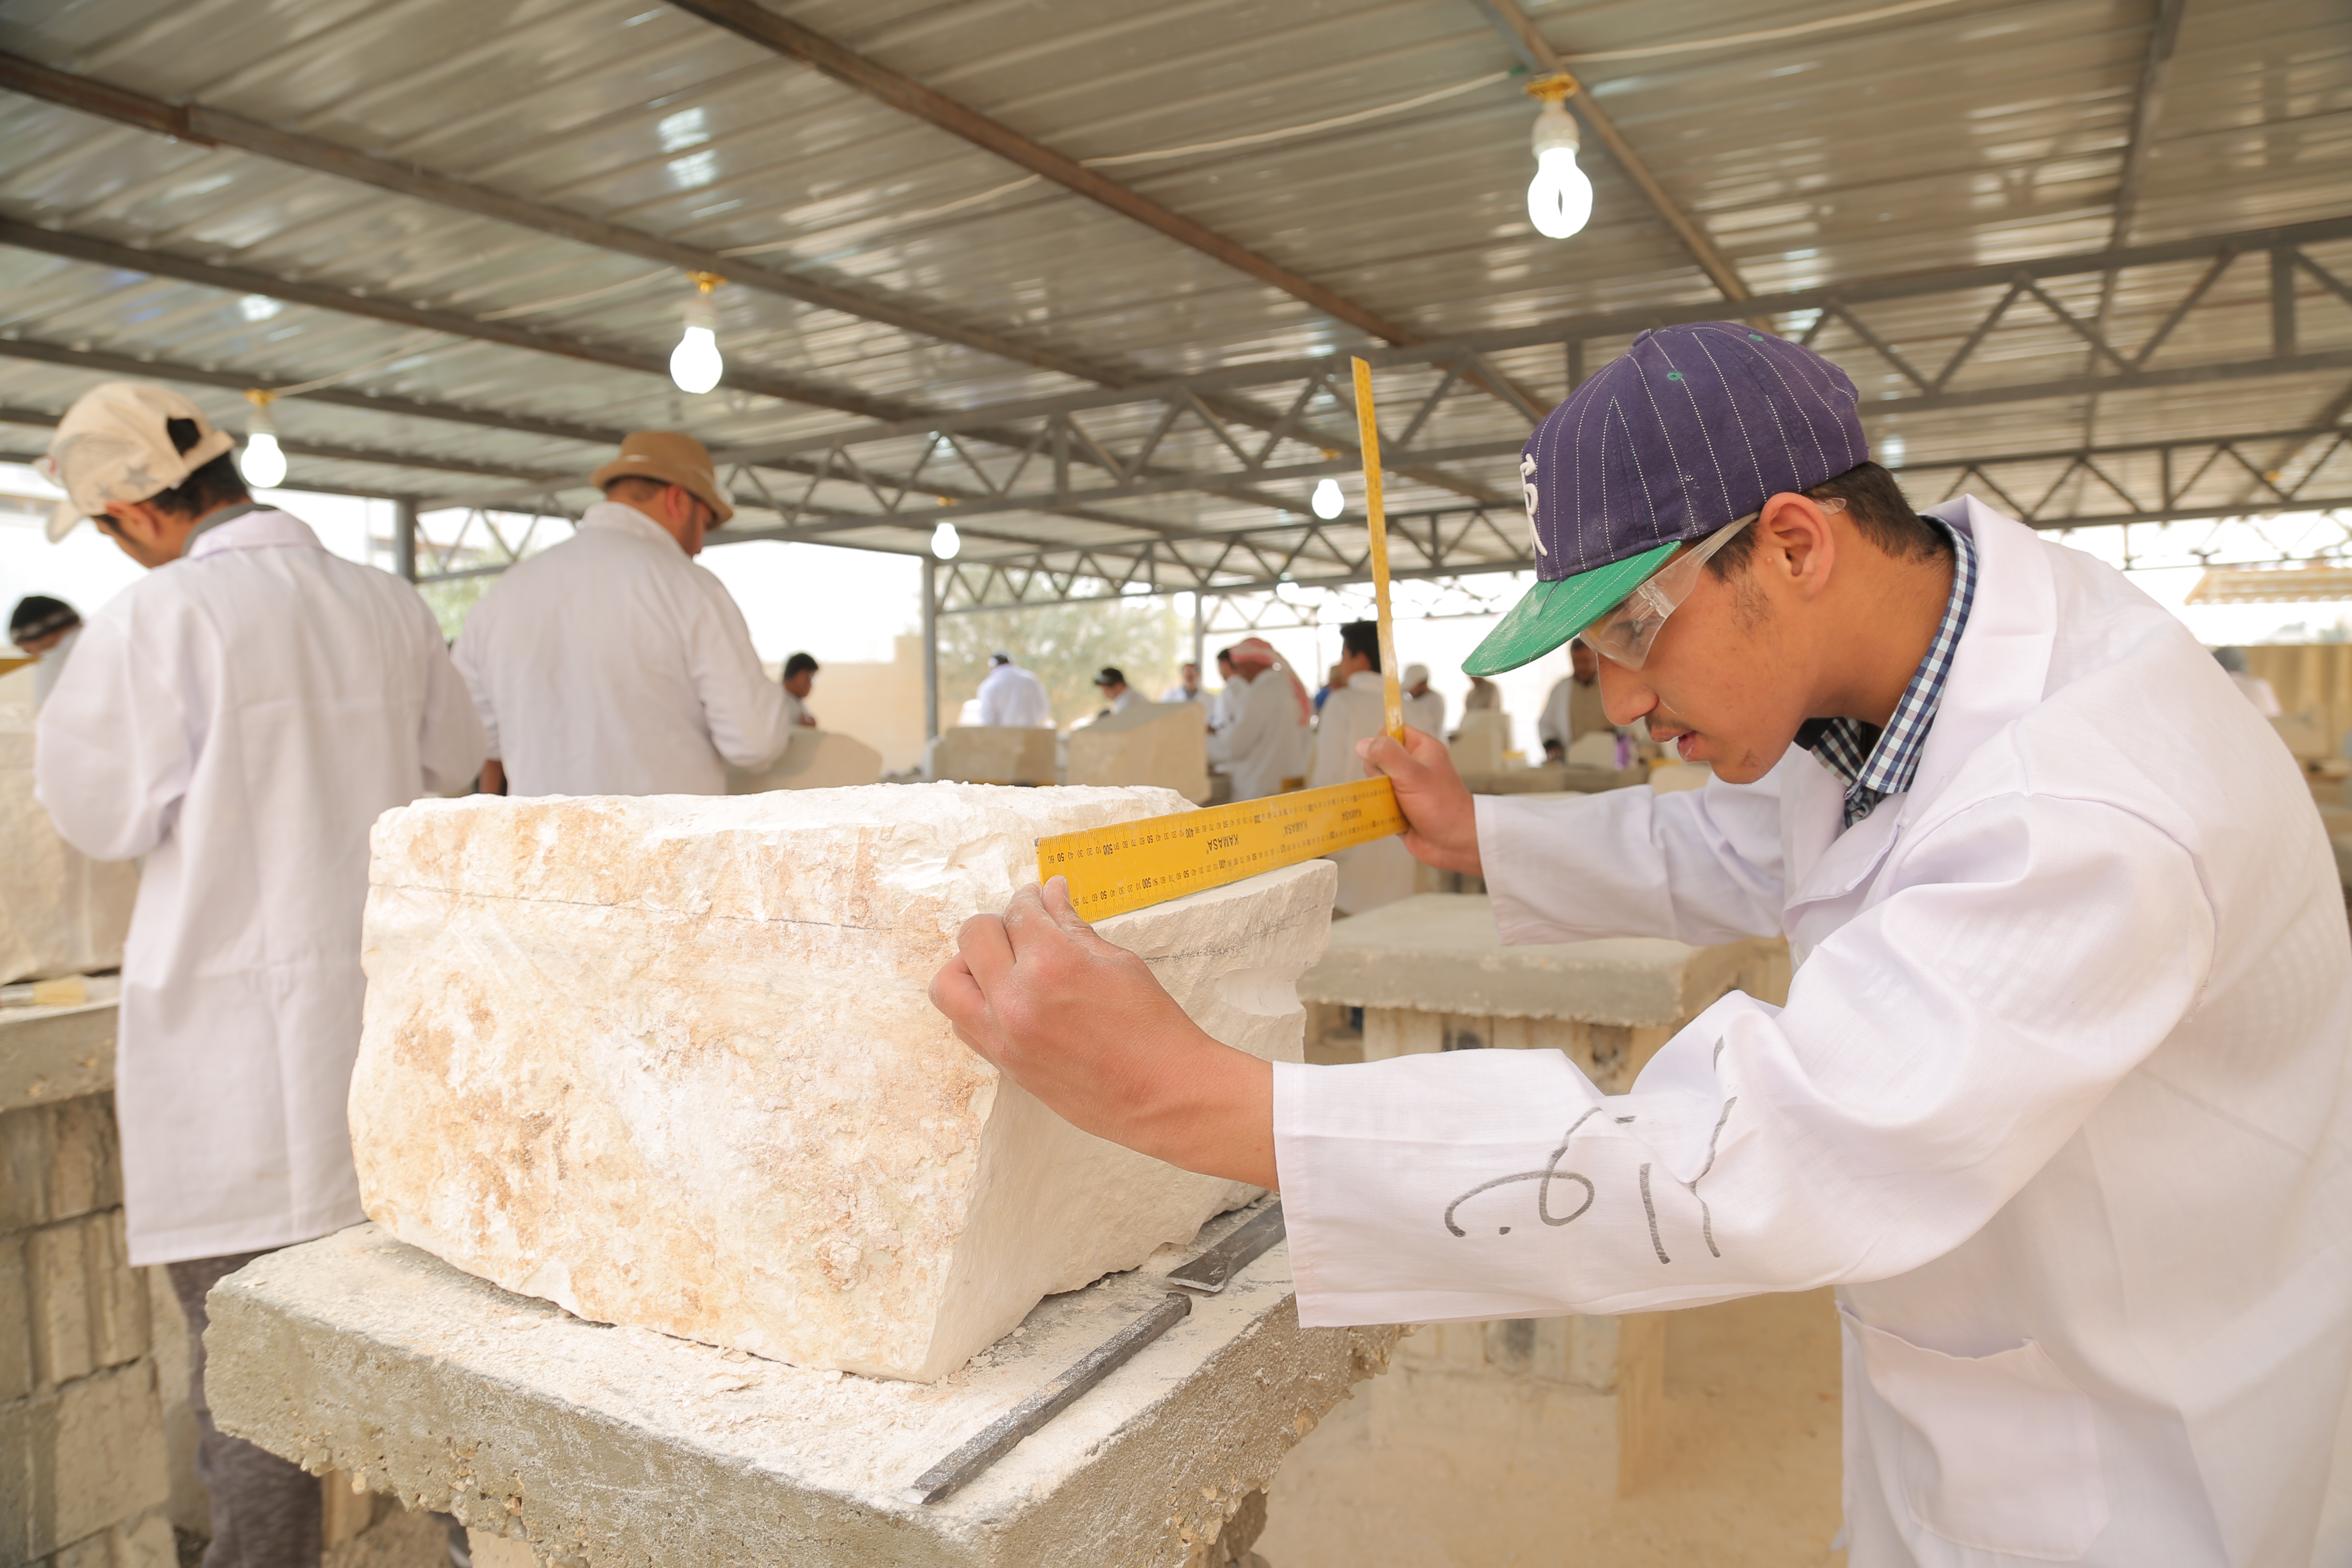 Nawar, a Syrian trainee, measures stone before carving